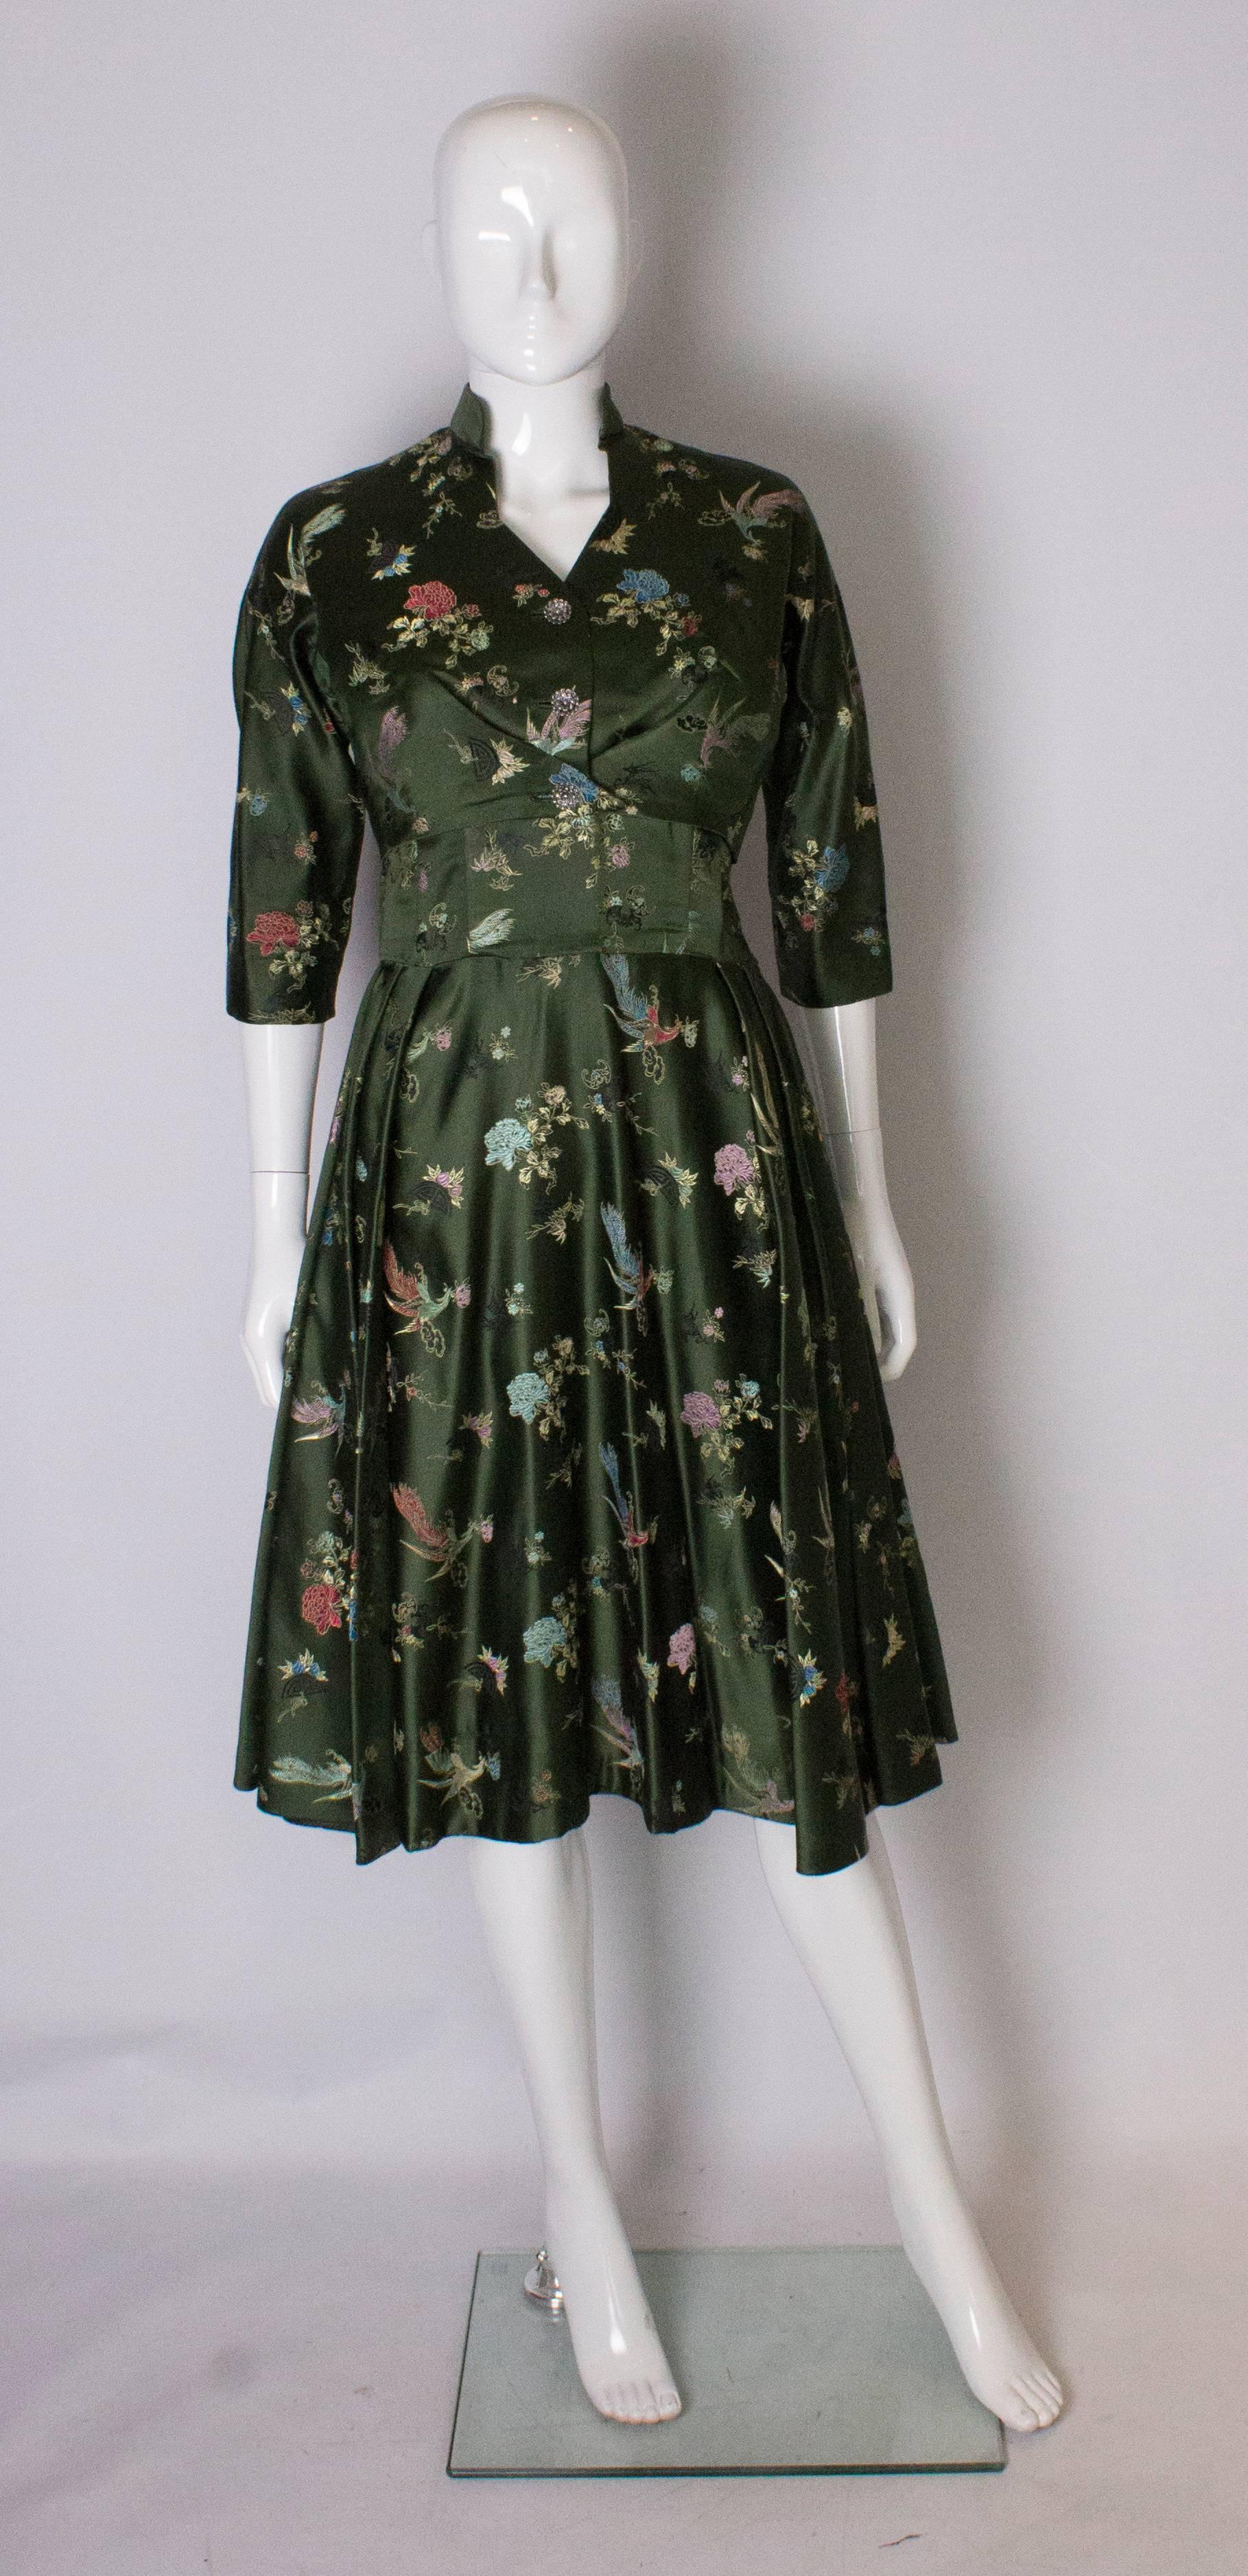 A pretty green cocktail dress and matching bolero jacket.  The dress has a boned bodice, with a flared skirt and side zip. The jacket has a three button fastening. Both the dress and jacket are fully lined.  Measurements: Dress, bust 36'', waist